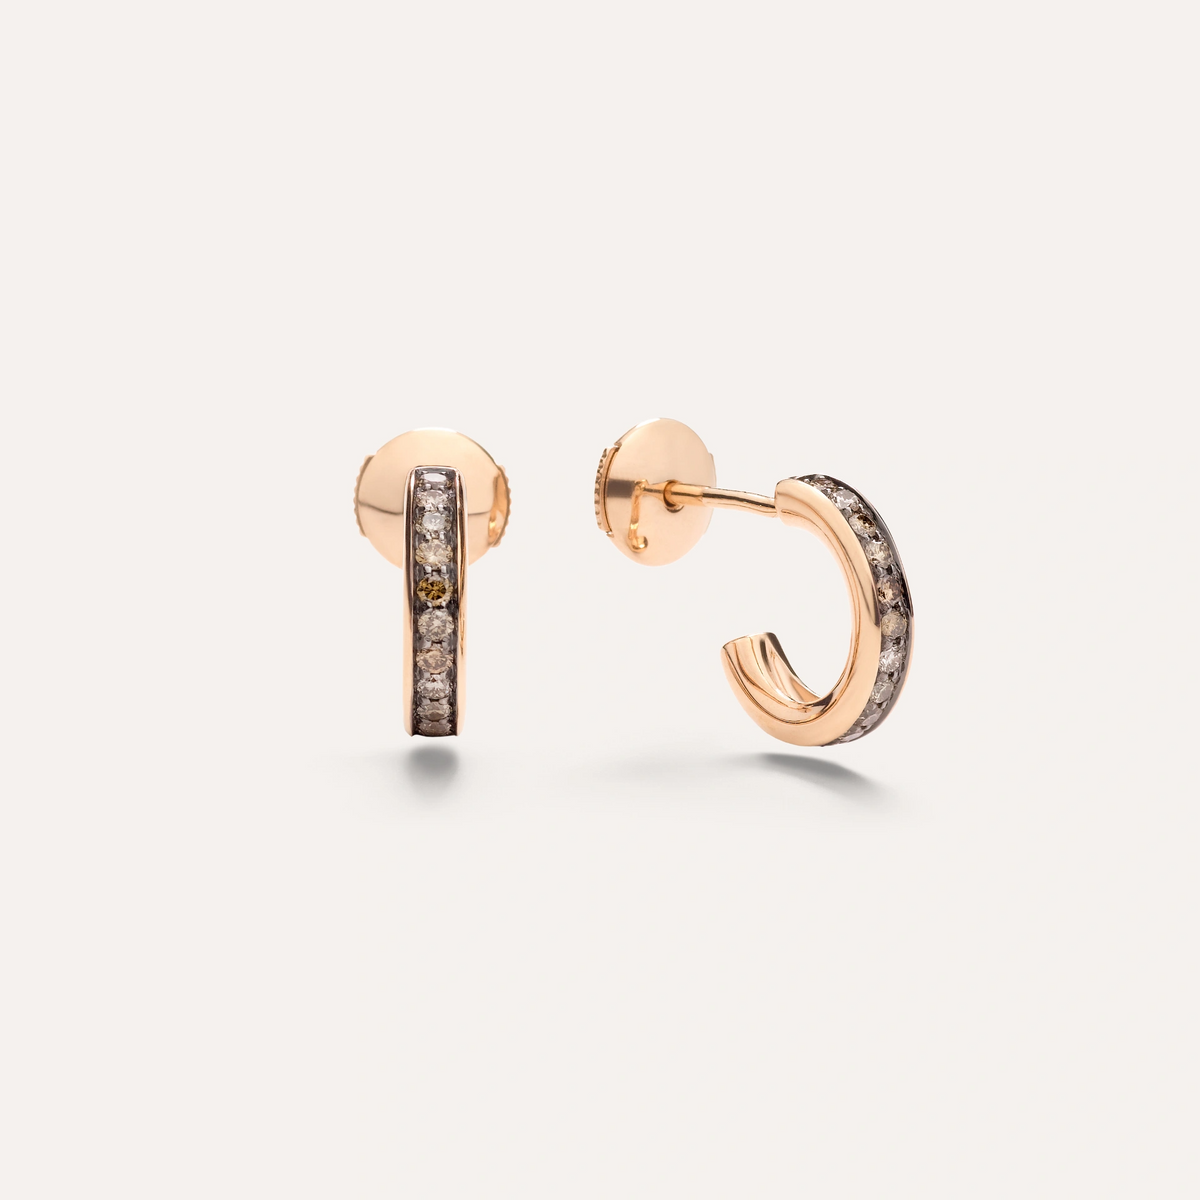 Pomellato Together Earrings in 18k Rose Gold with Brown Diamonds - Orsini Jewellers